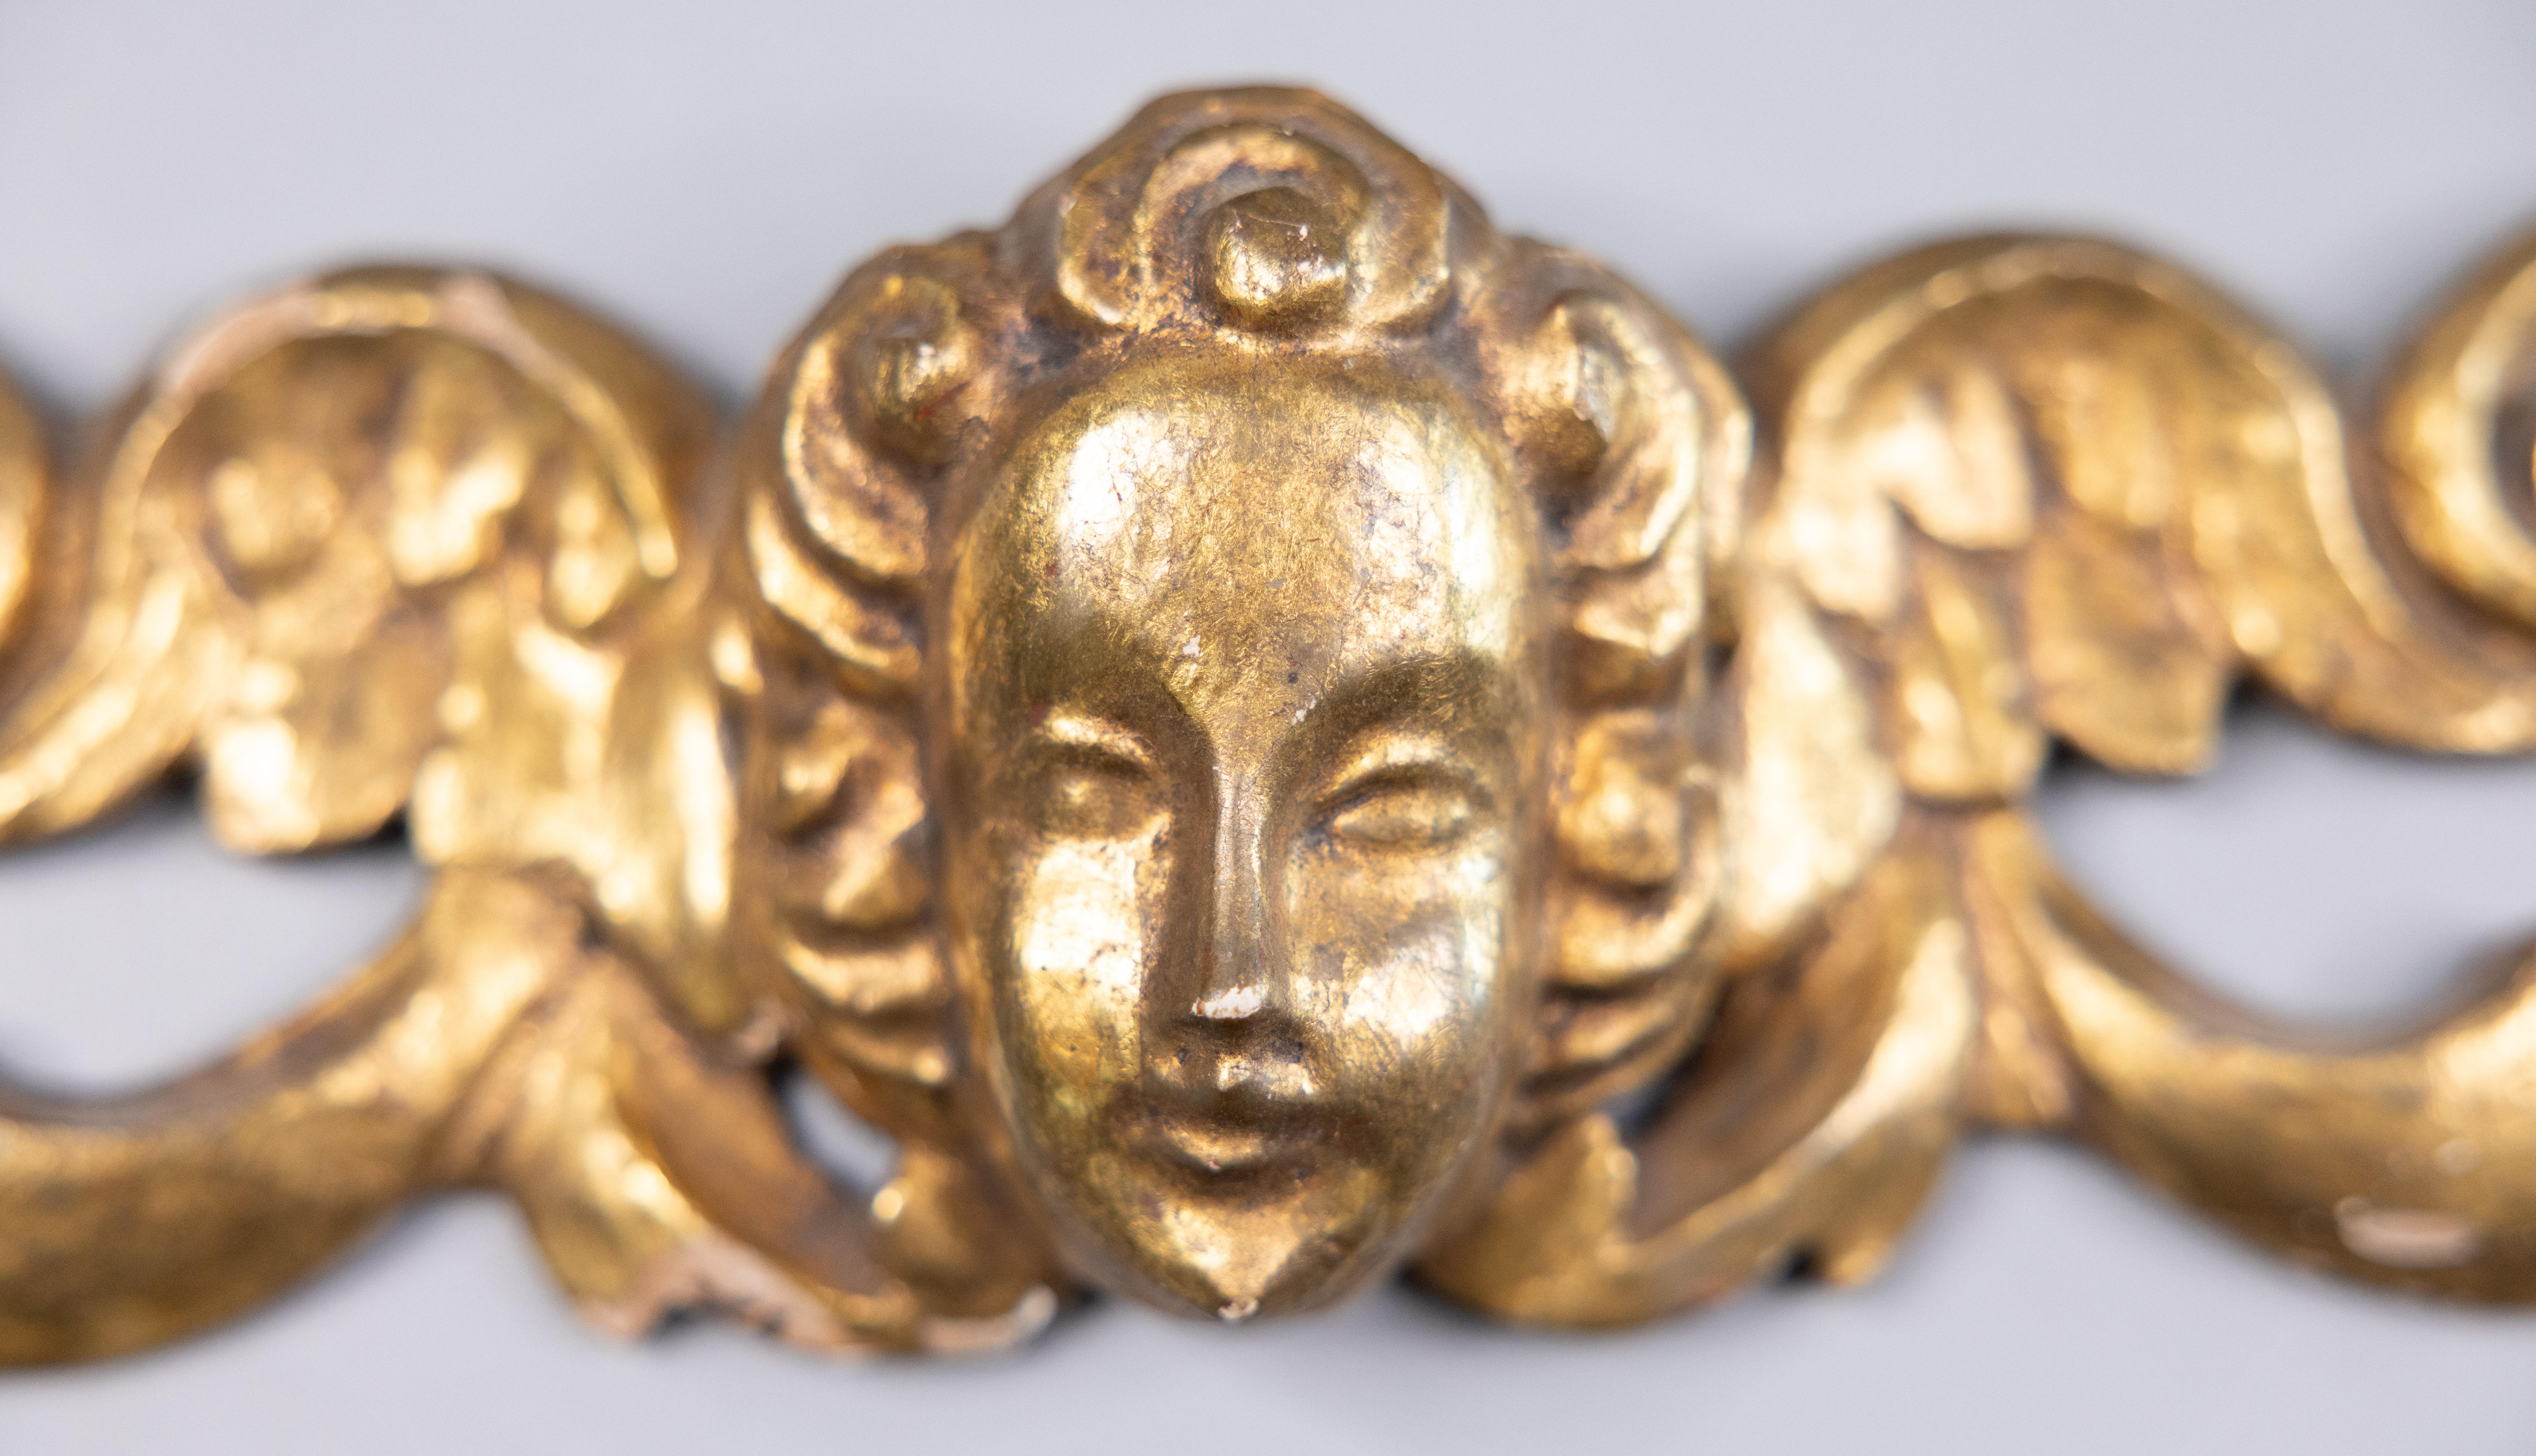 Rococo 18th Century Italian Carved Giltwood Cherub Architectural Fragment Wall Hanging For Sale